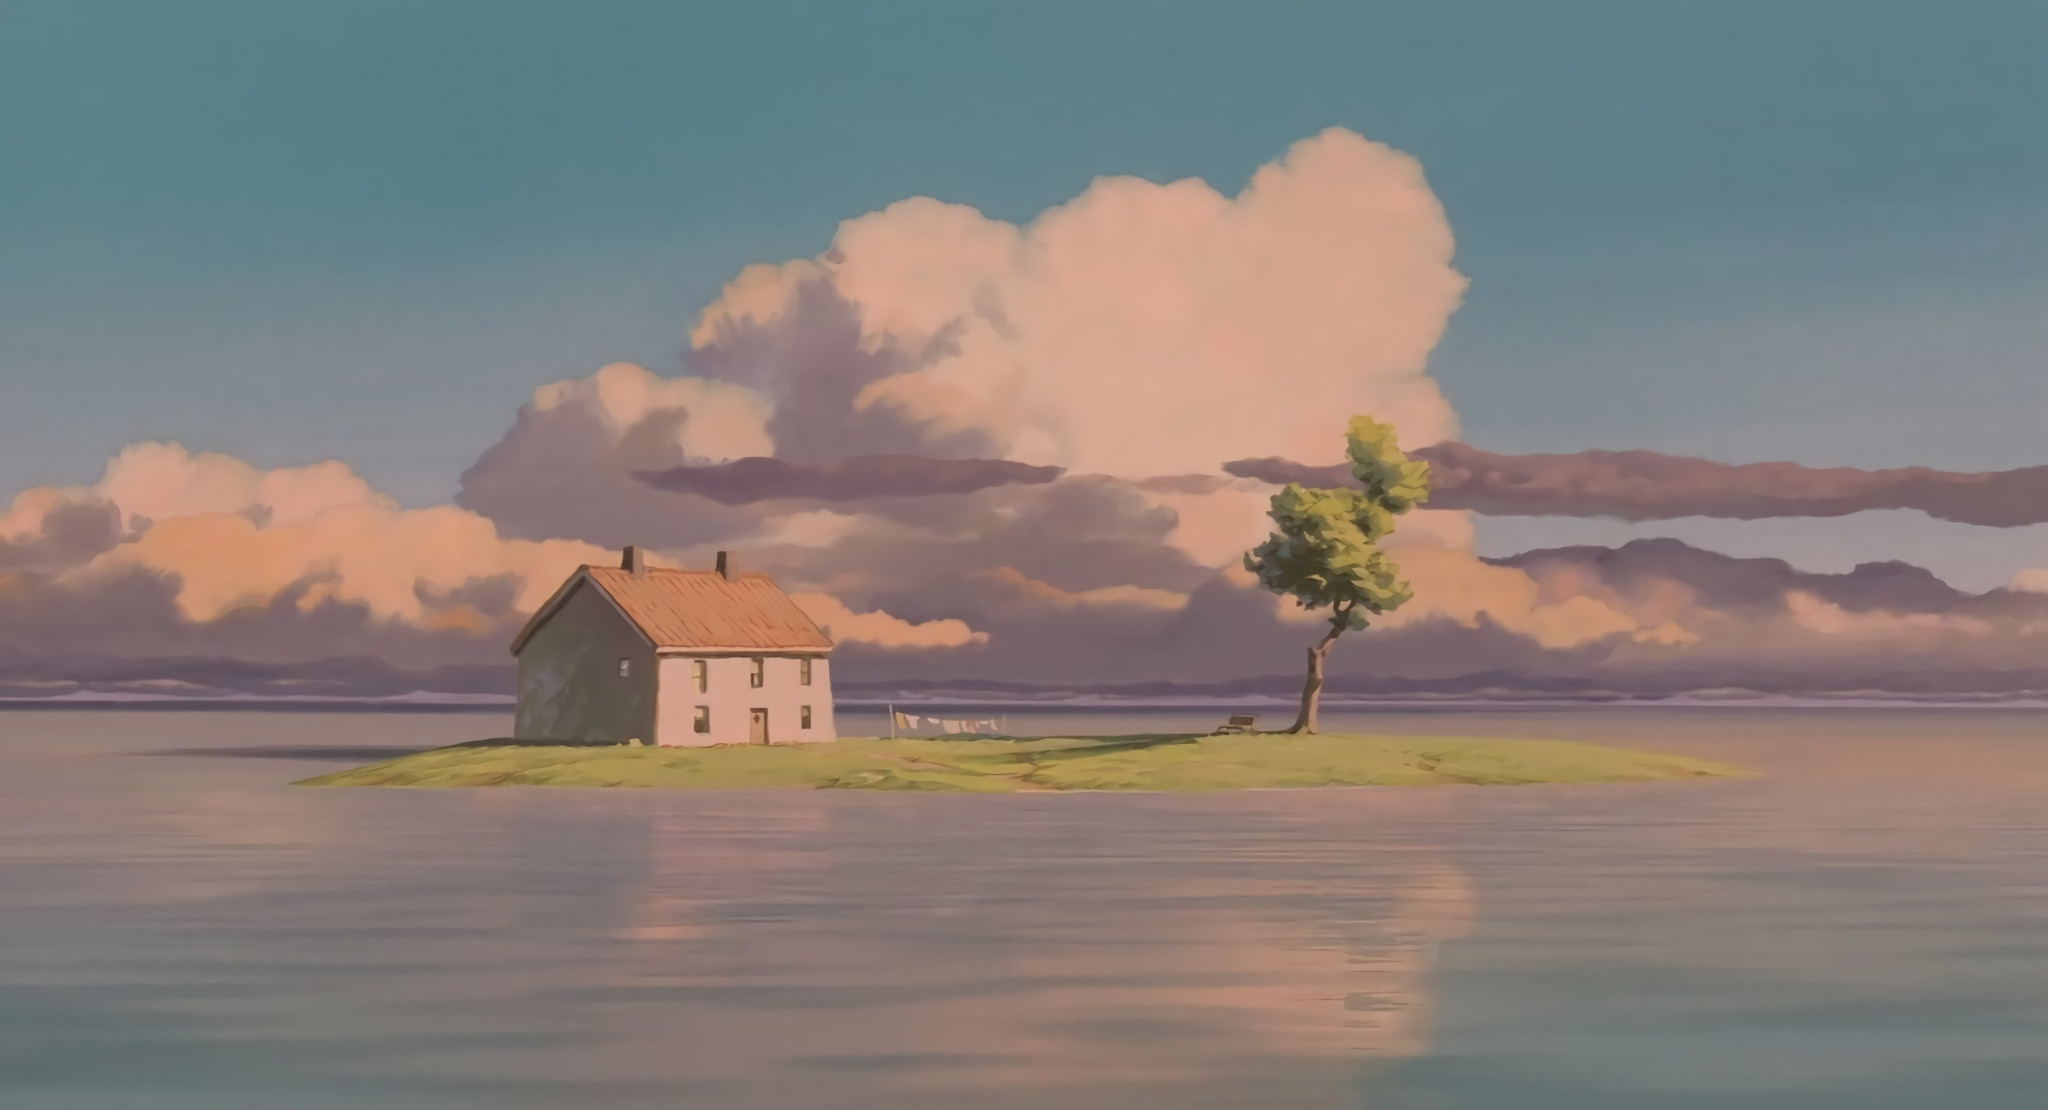 Some HD wallpapers from Spirited Aways train scene. Pure serenity. anime